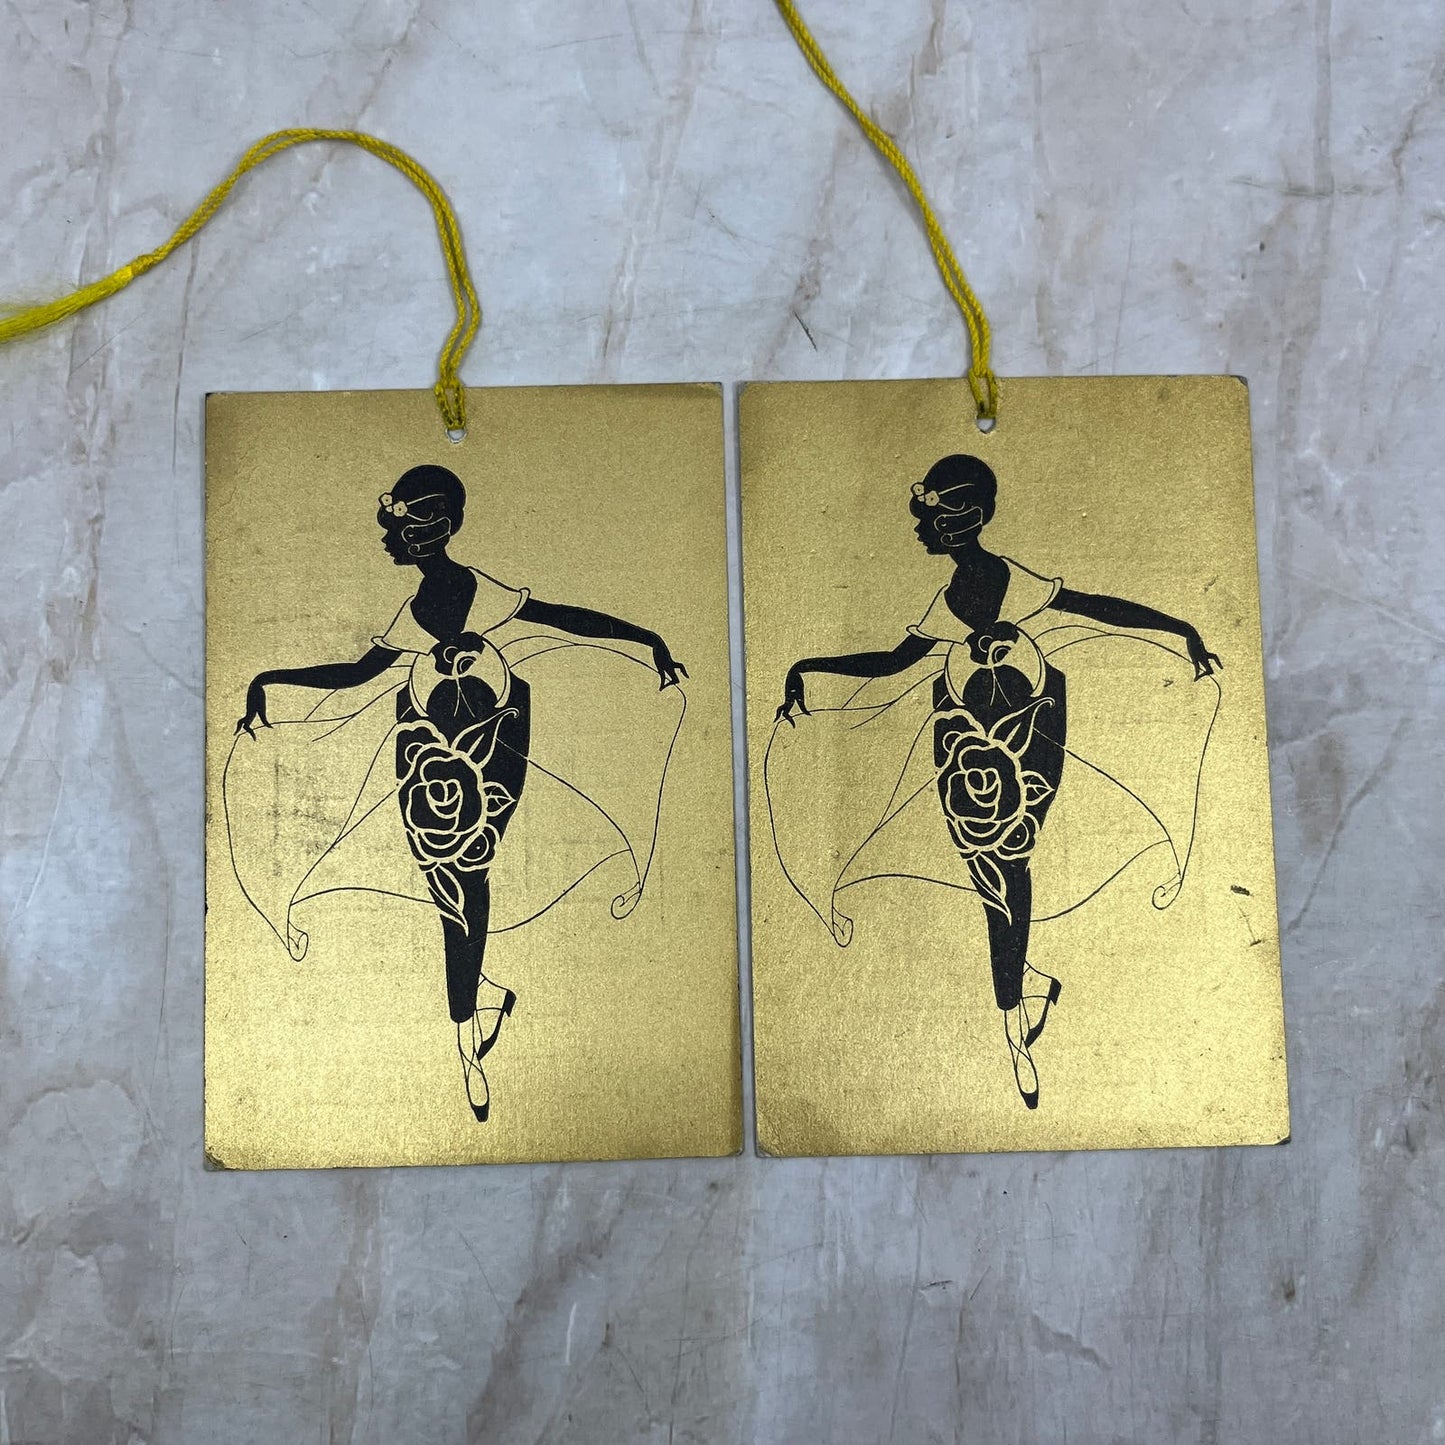 Vintage Art Deco Tally Card Set of 2 Gold Dancing Girl Silhouette AE3